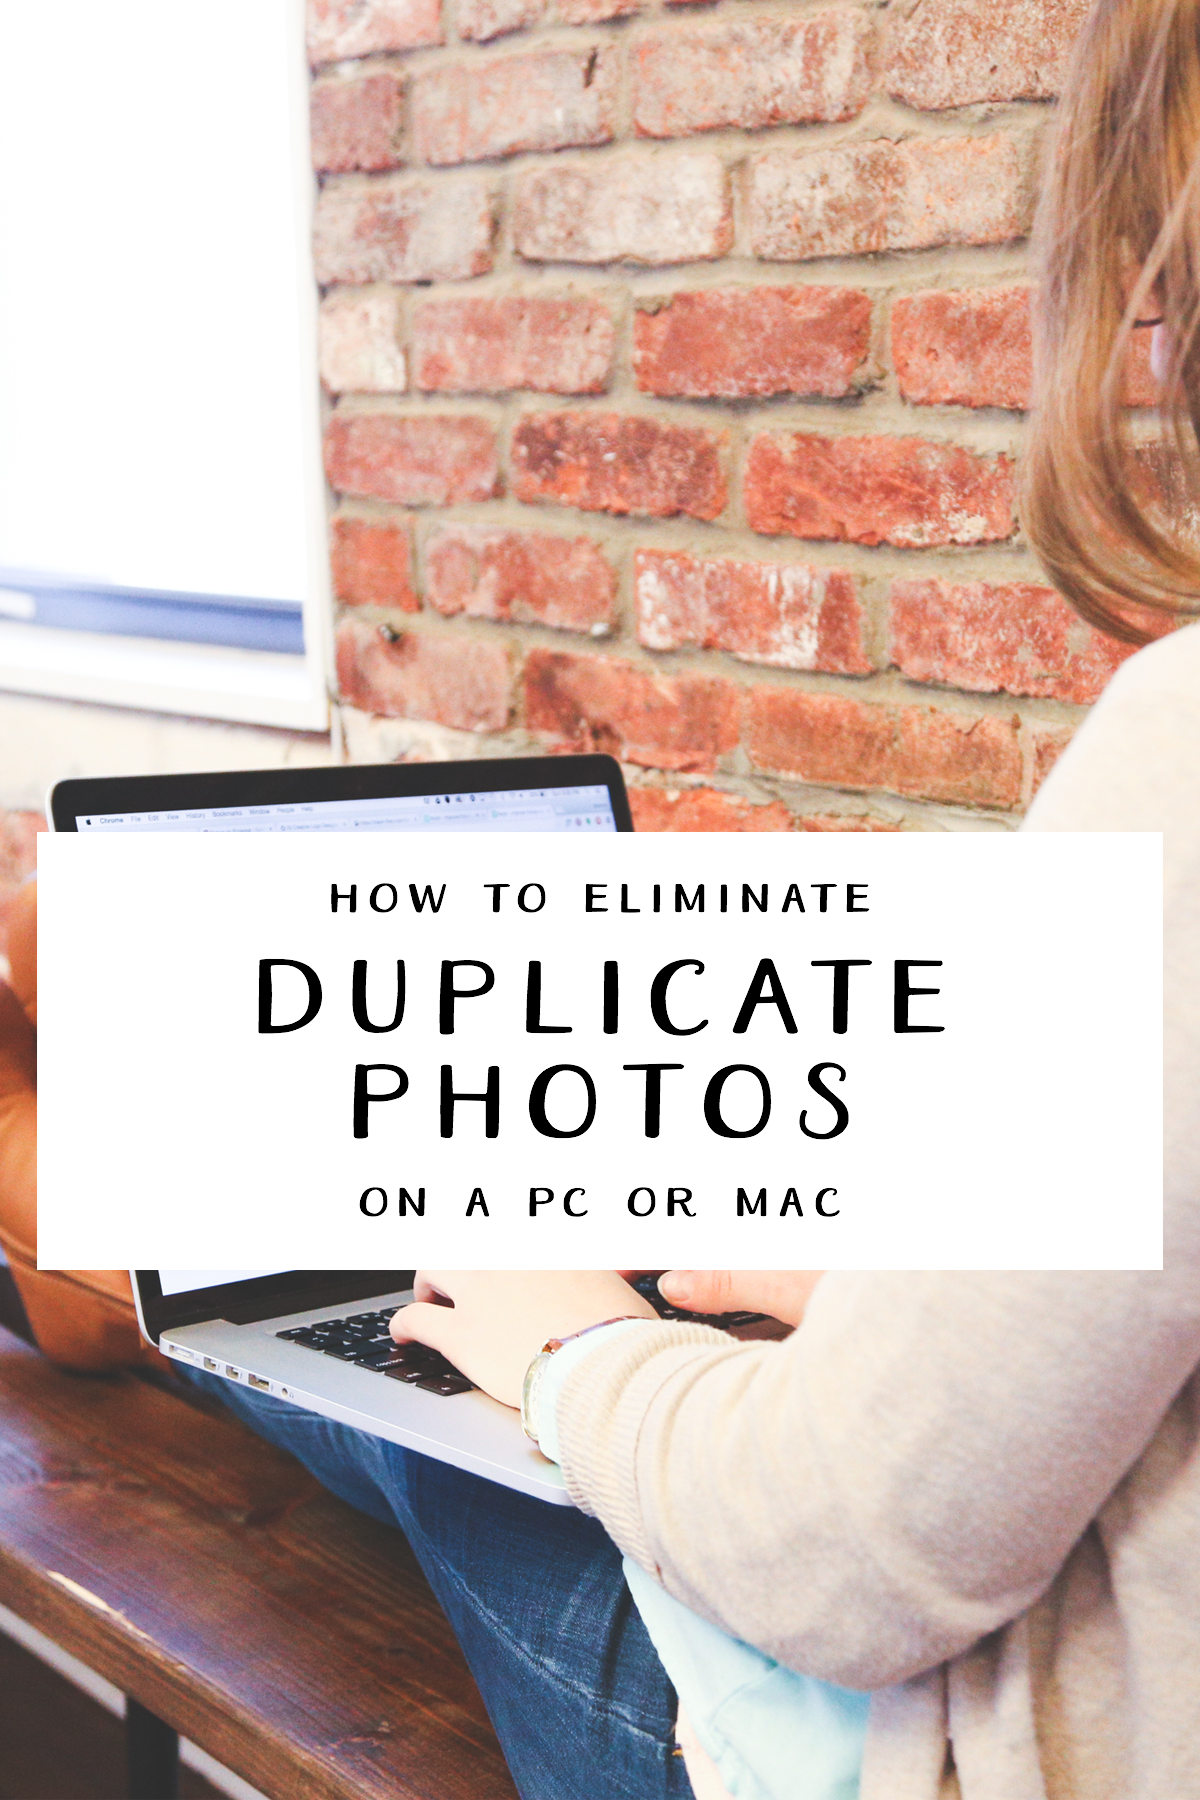 How to Eliminate Duplicate Photos on a PC or Mac